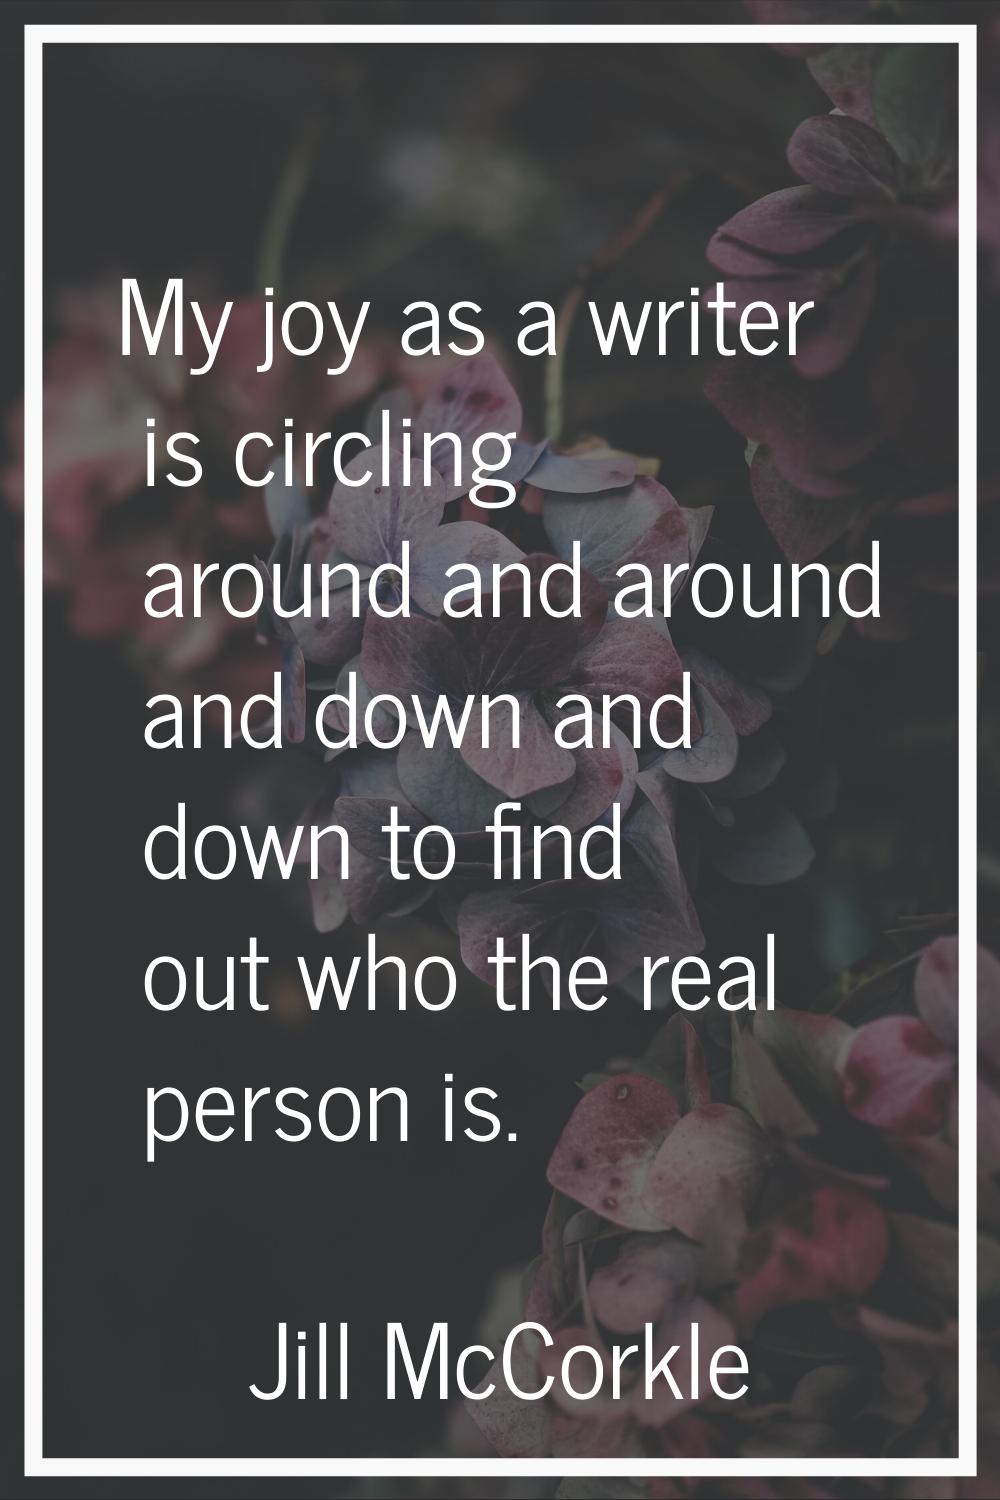 My joy as a writer is circling around and around and down and down to find out who the real person 